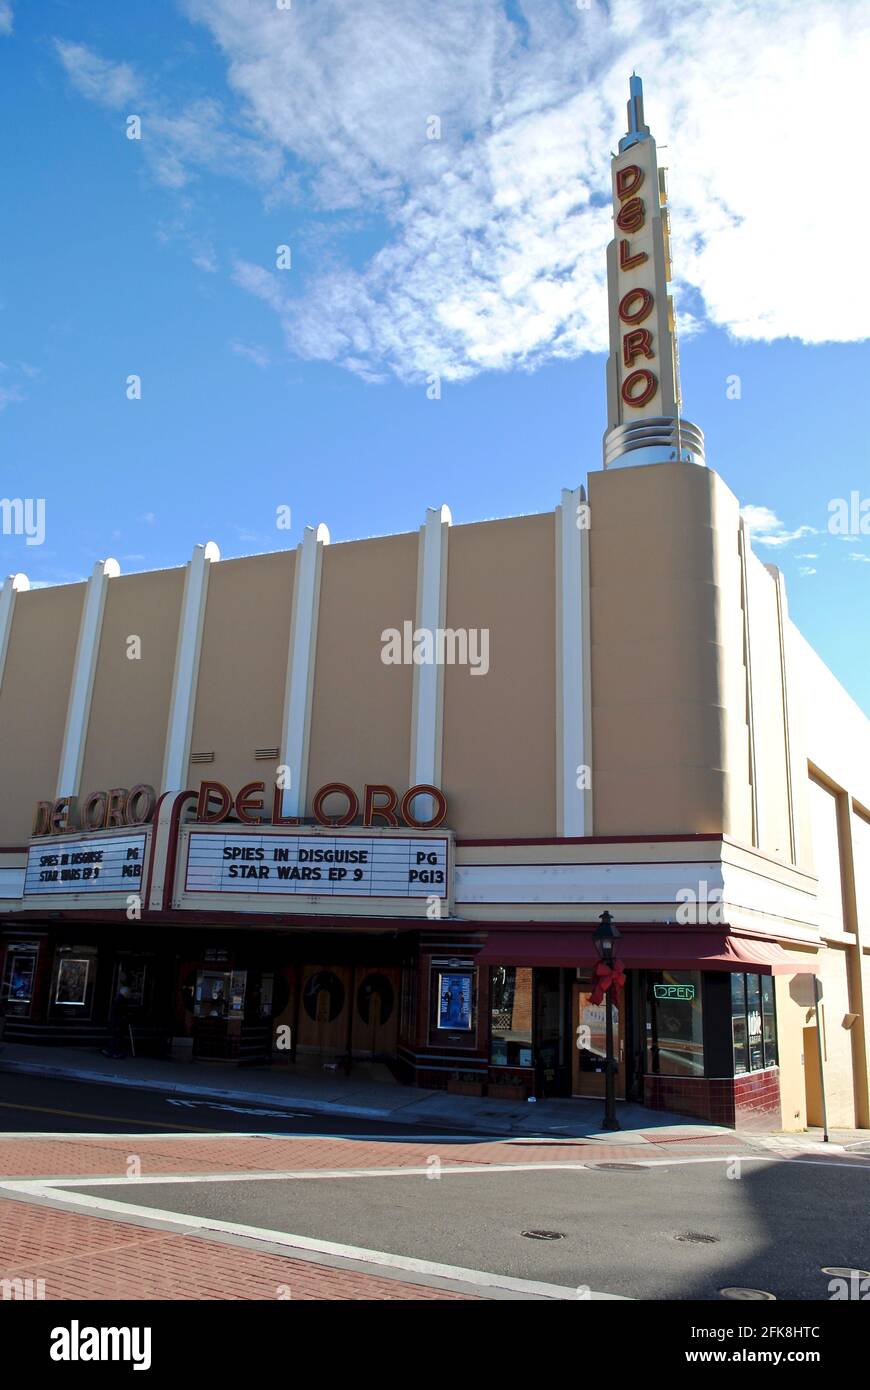 Grass Valley, California: Del Oro Theatre in a gold rush town. 'Oro’ is Spanish for gold. Art Moderne cinema theater built in 1942 by United Artists. Stock Photo